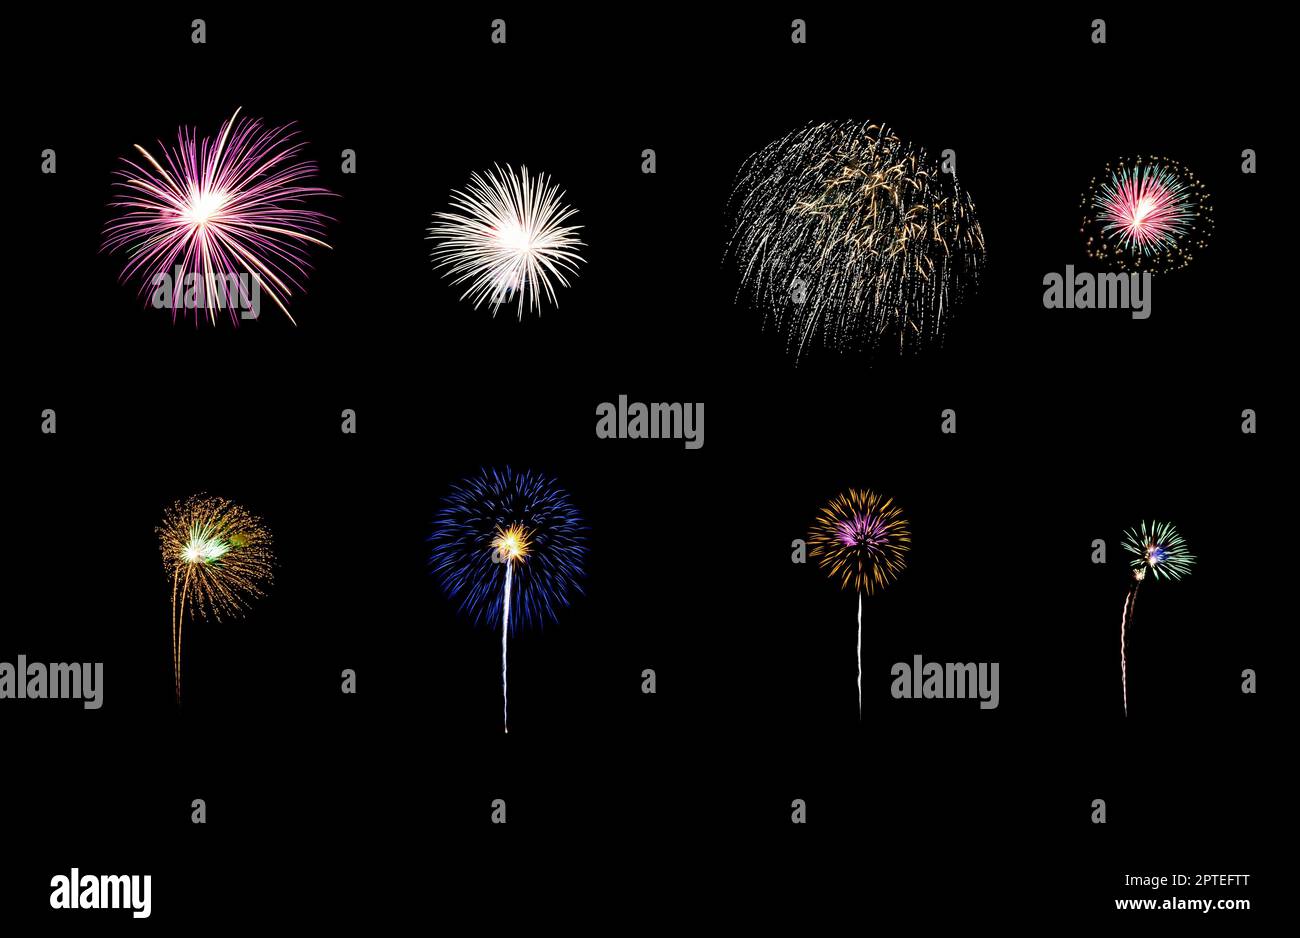 Collection of colorful festive eight fireworks exploding over night sky, isolated on black background Stock Photo